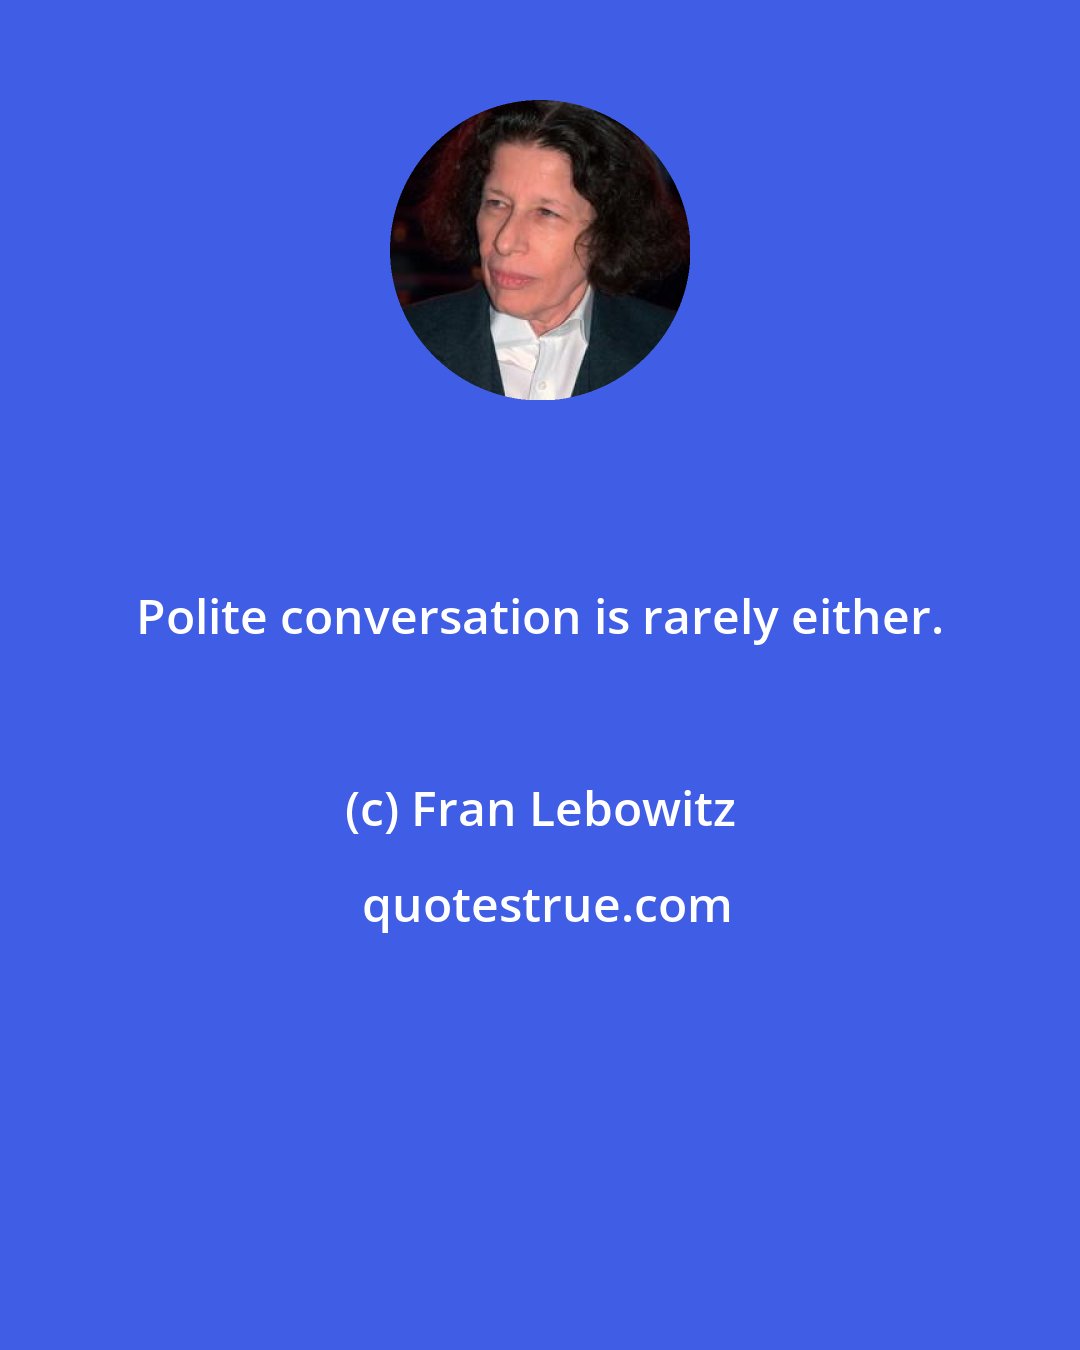 Fran Lebowitz: Polite conversation is rarely either.